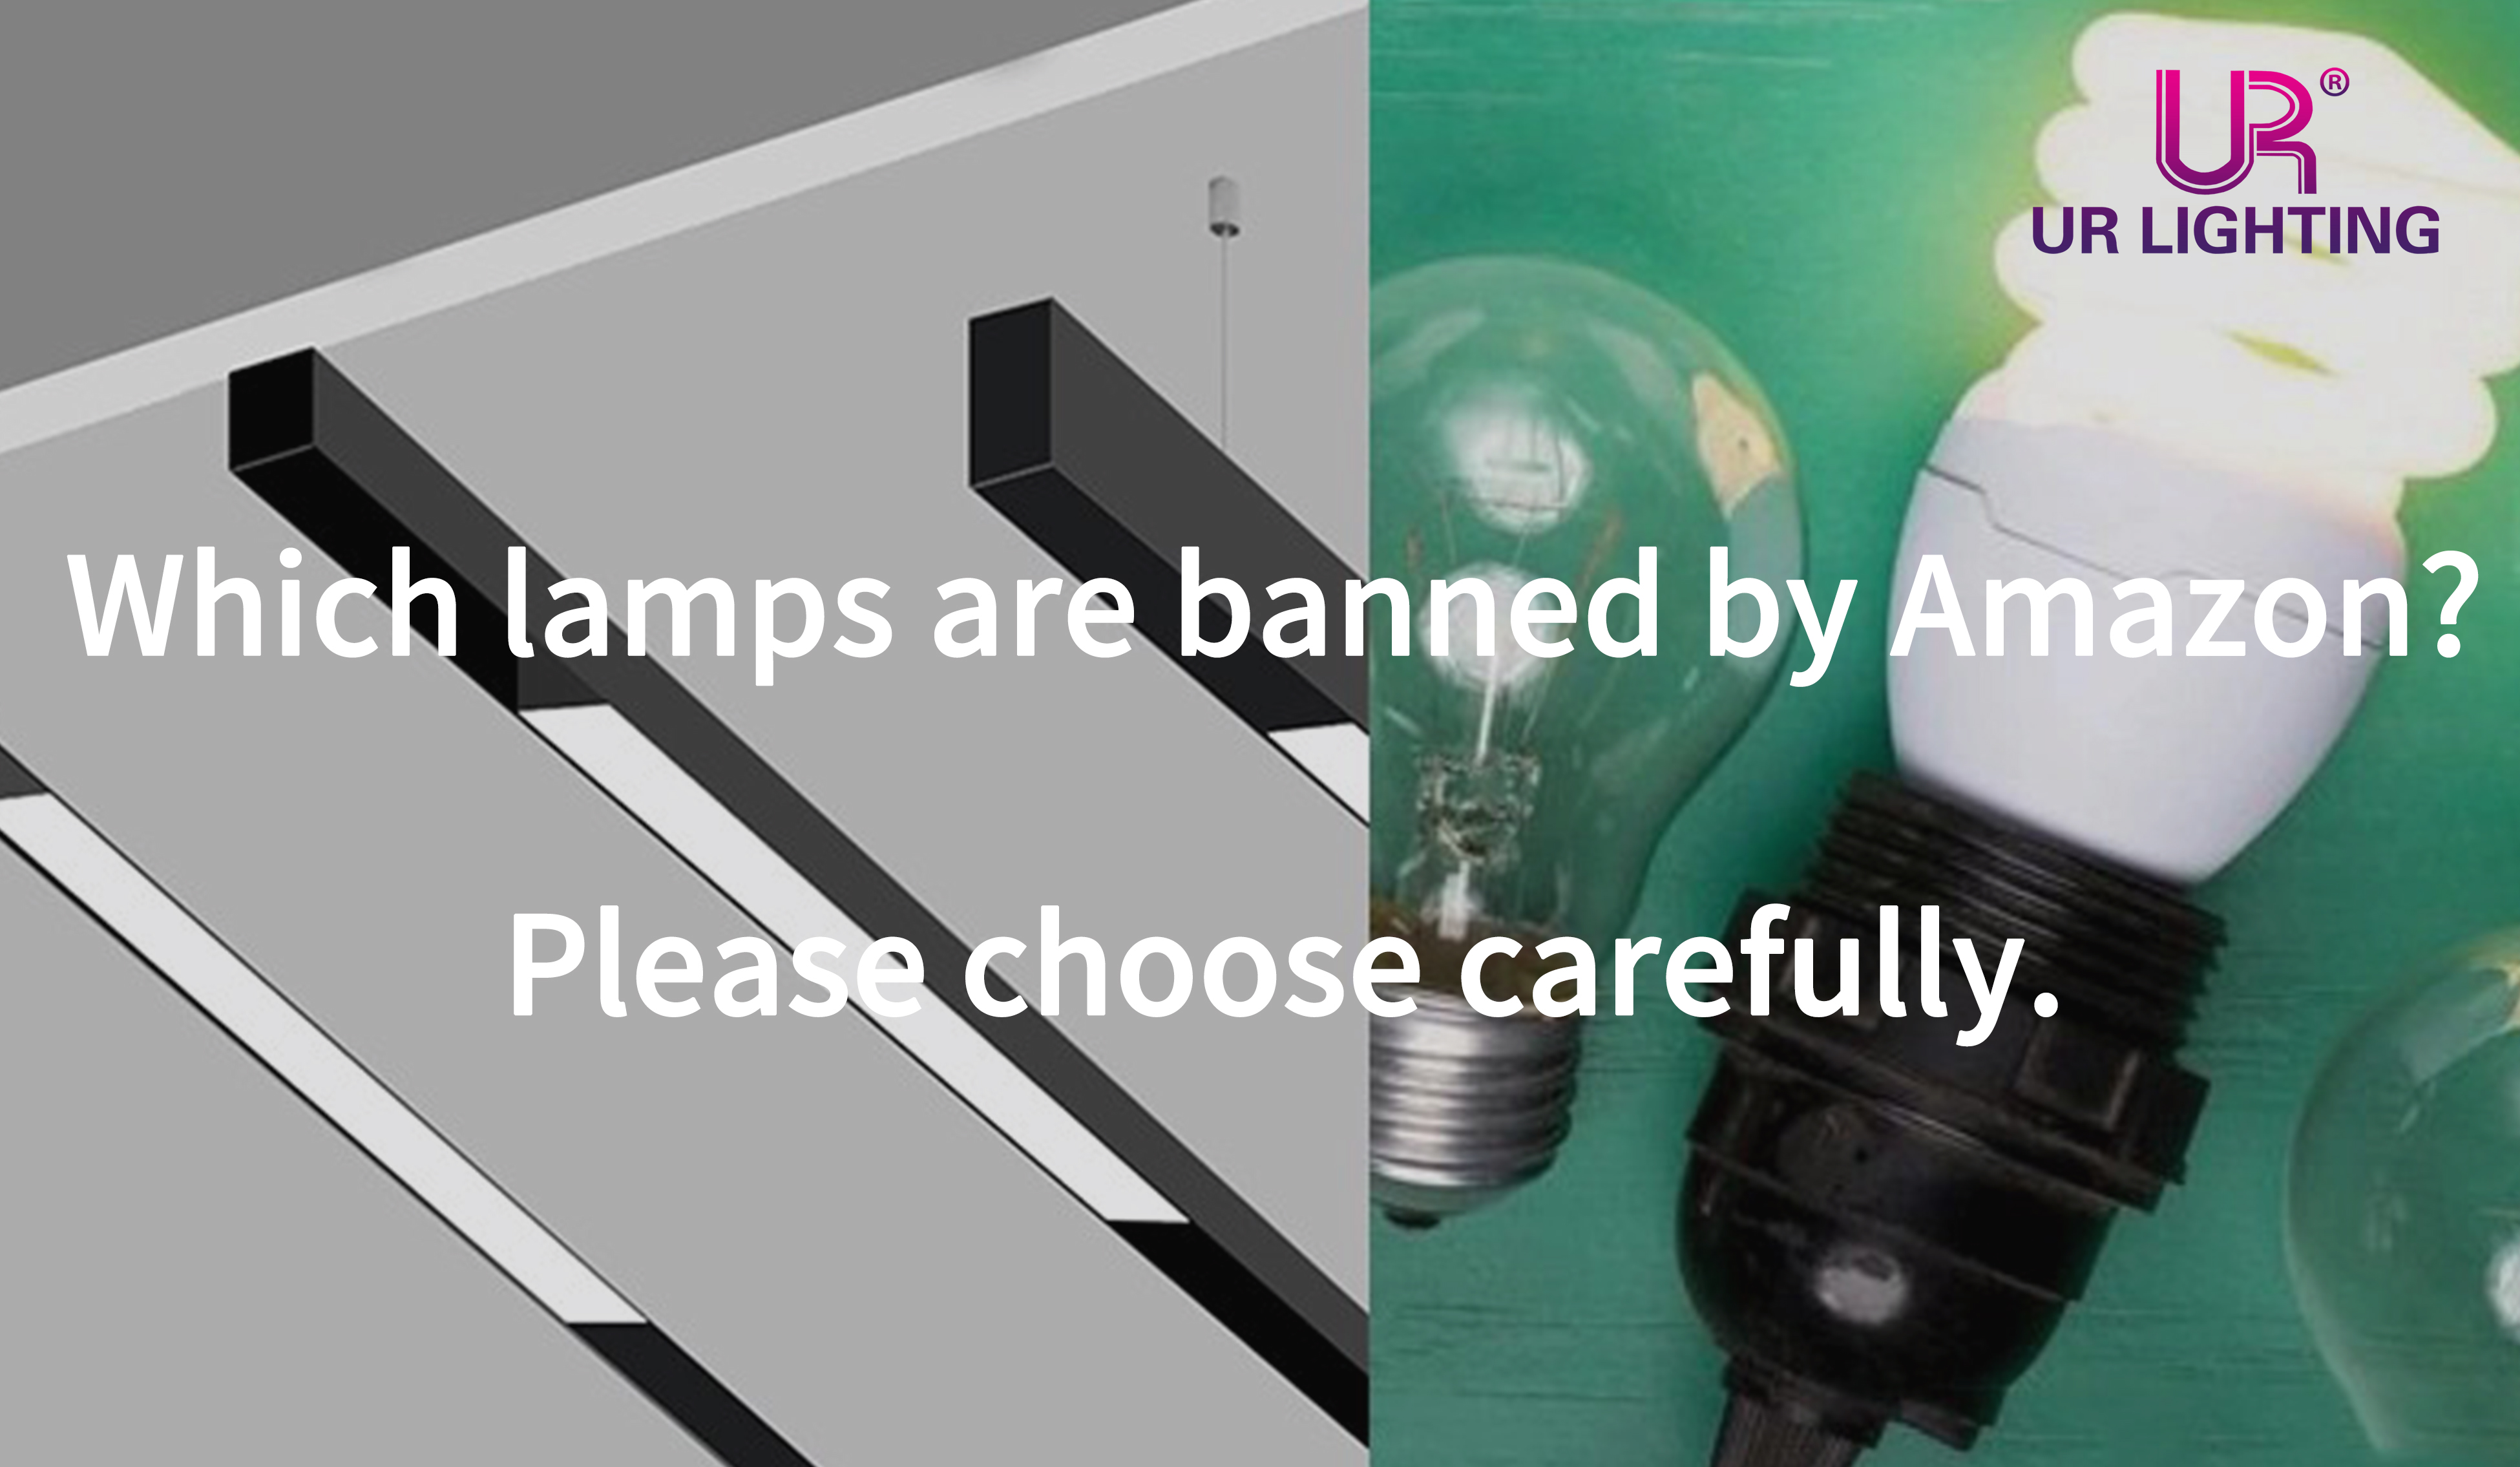 Which lamps are banned by Amazon? Please choose carefully.